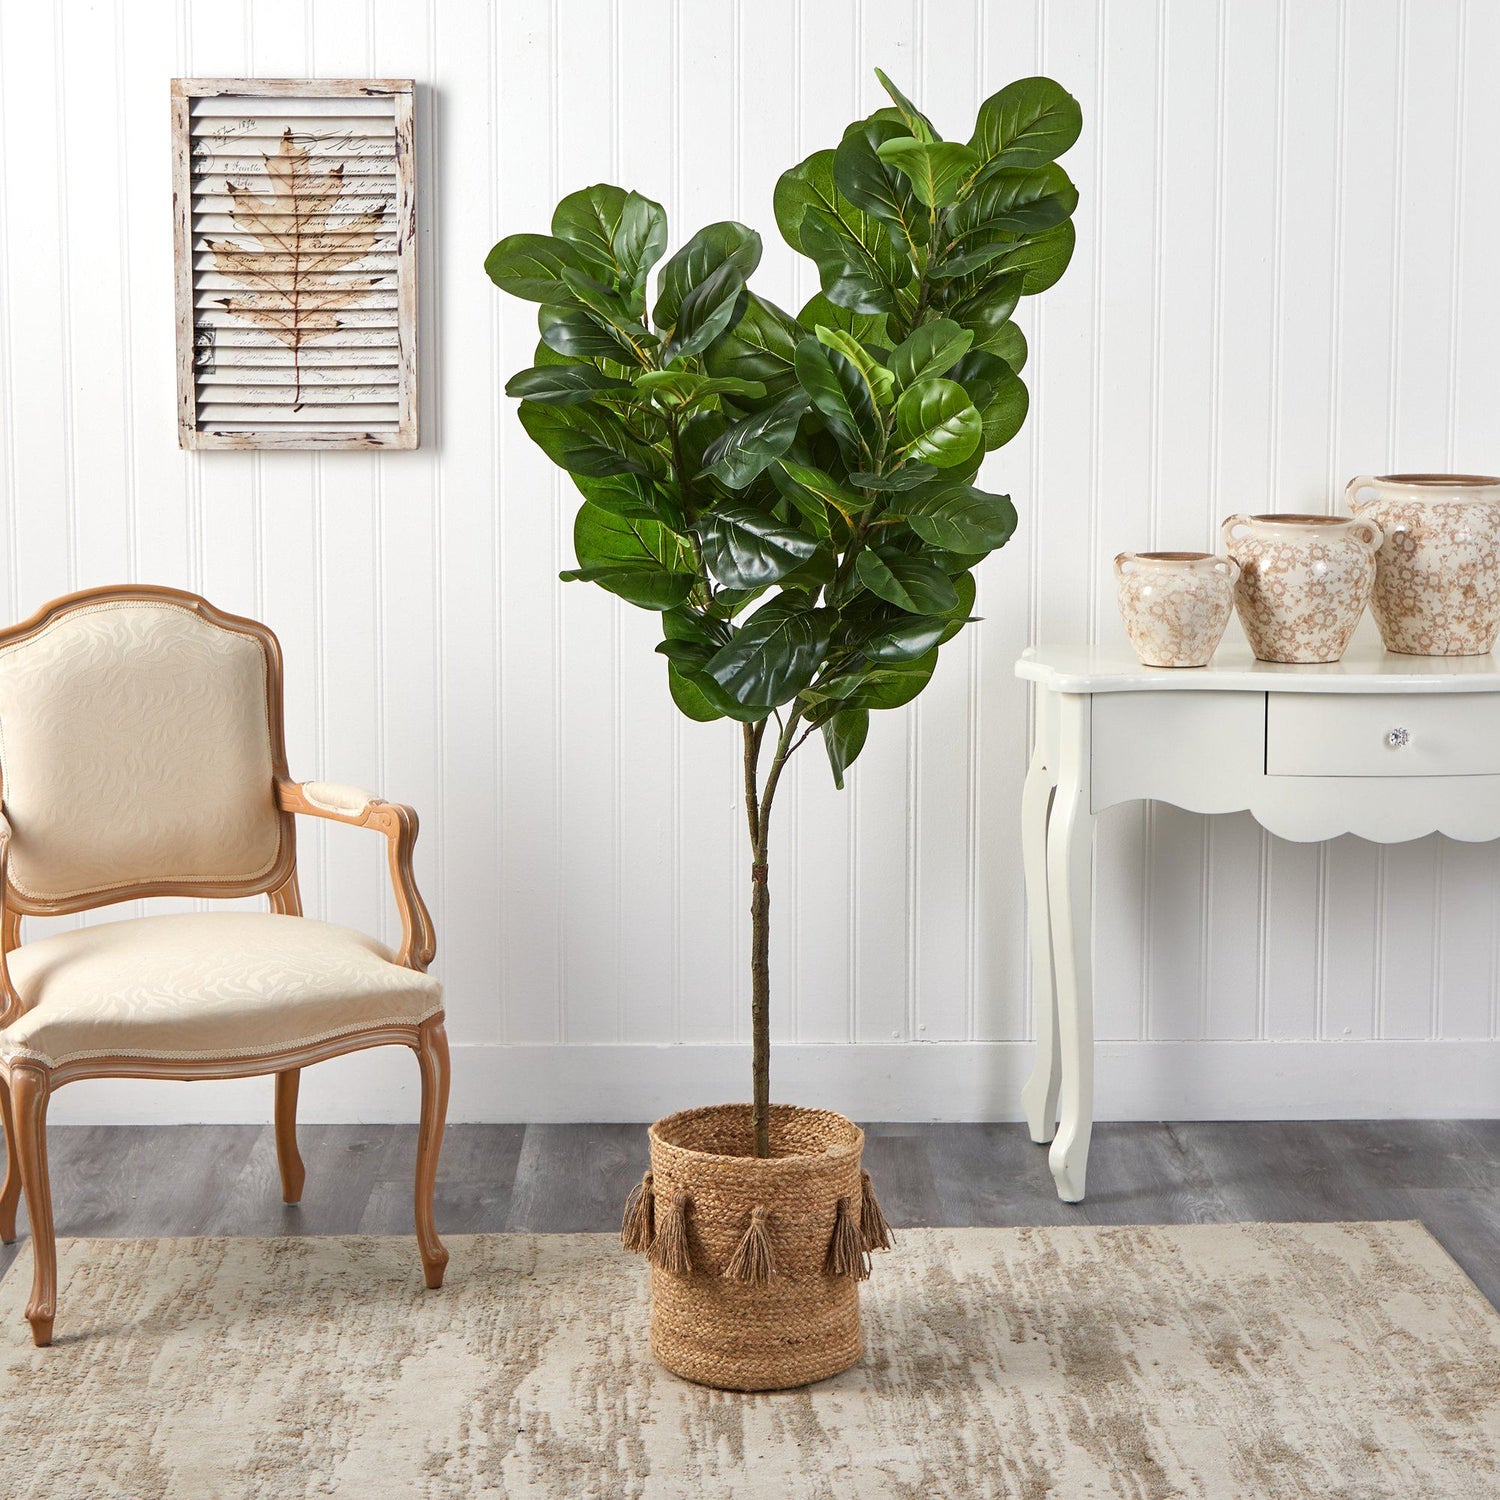 6’ Fiddle Leaf Fig Artificial Tree in Handmade Natural Jute Planter with Tassels